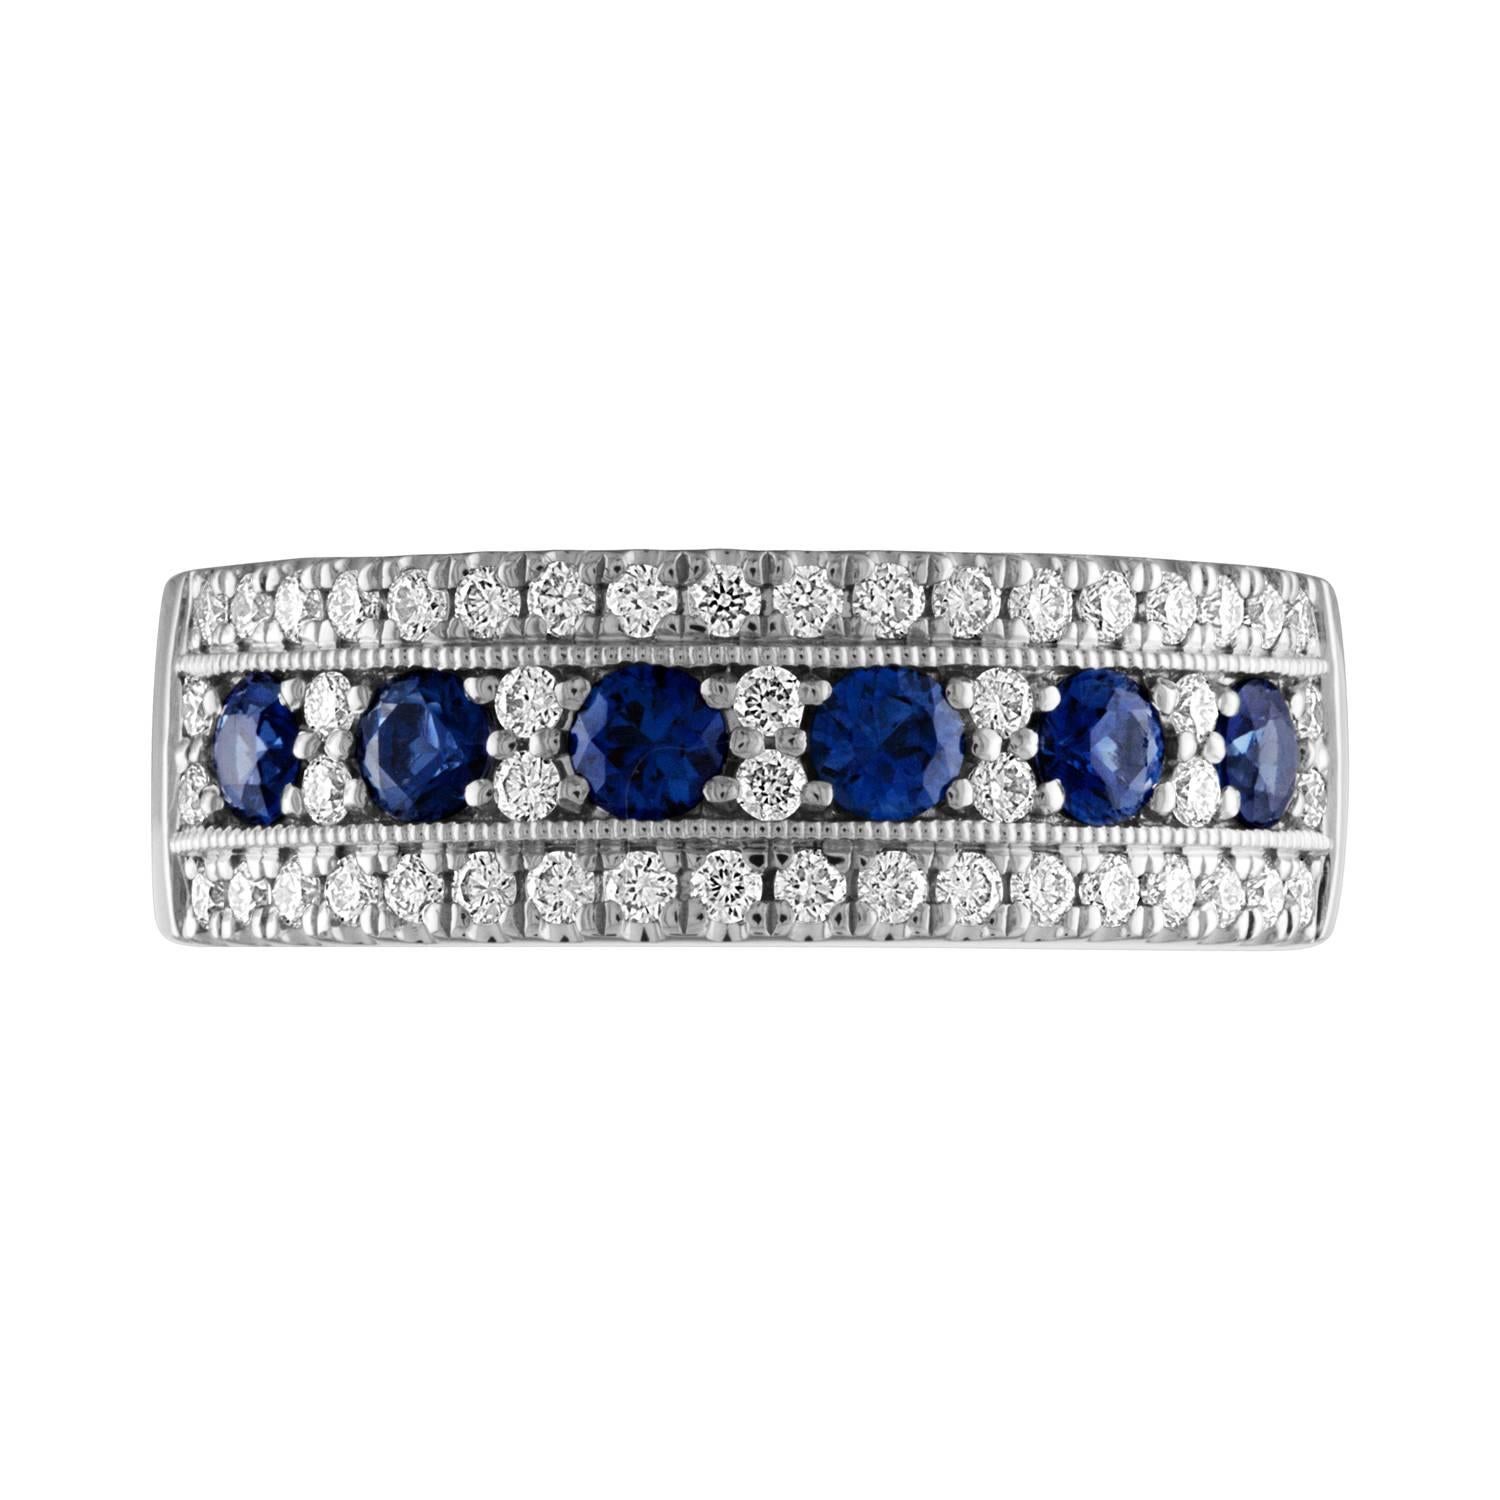 This classy and timeless band features 6 beautiful and sparkly sapphires.  The sapphires are surrounded by shiny brilliant cut diamonds.
Metal:  14k White
Sapphires:  6 round sapphires = .57ctw.  (2.70mm each)
50 round diamonds = .42ctw.  G, VS2